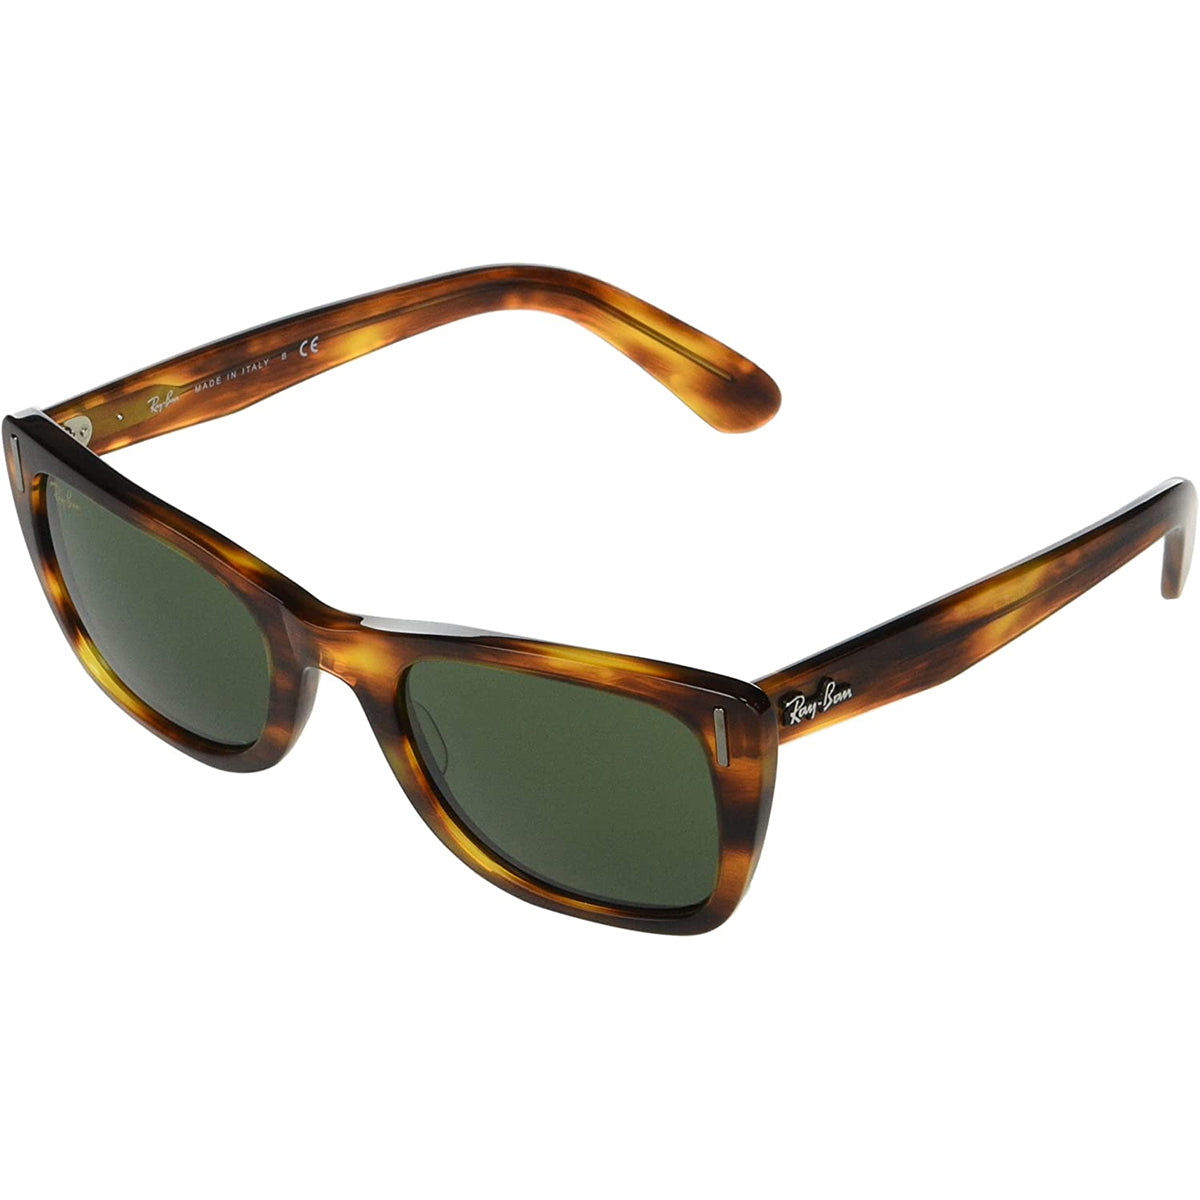 Ray-Ban Caribbean Legend Gold Adult Lifestyle Sunglasses-0RB2248